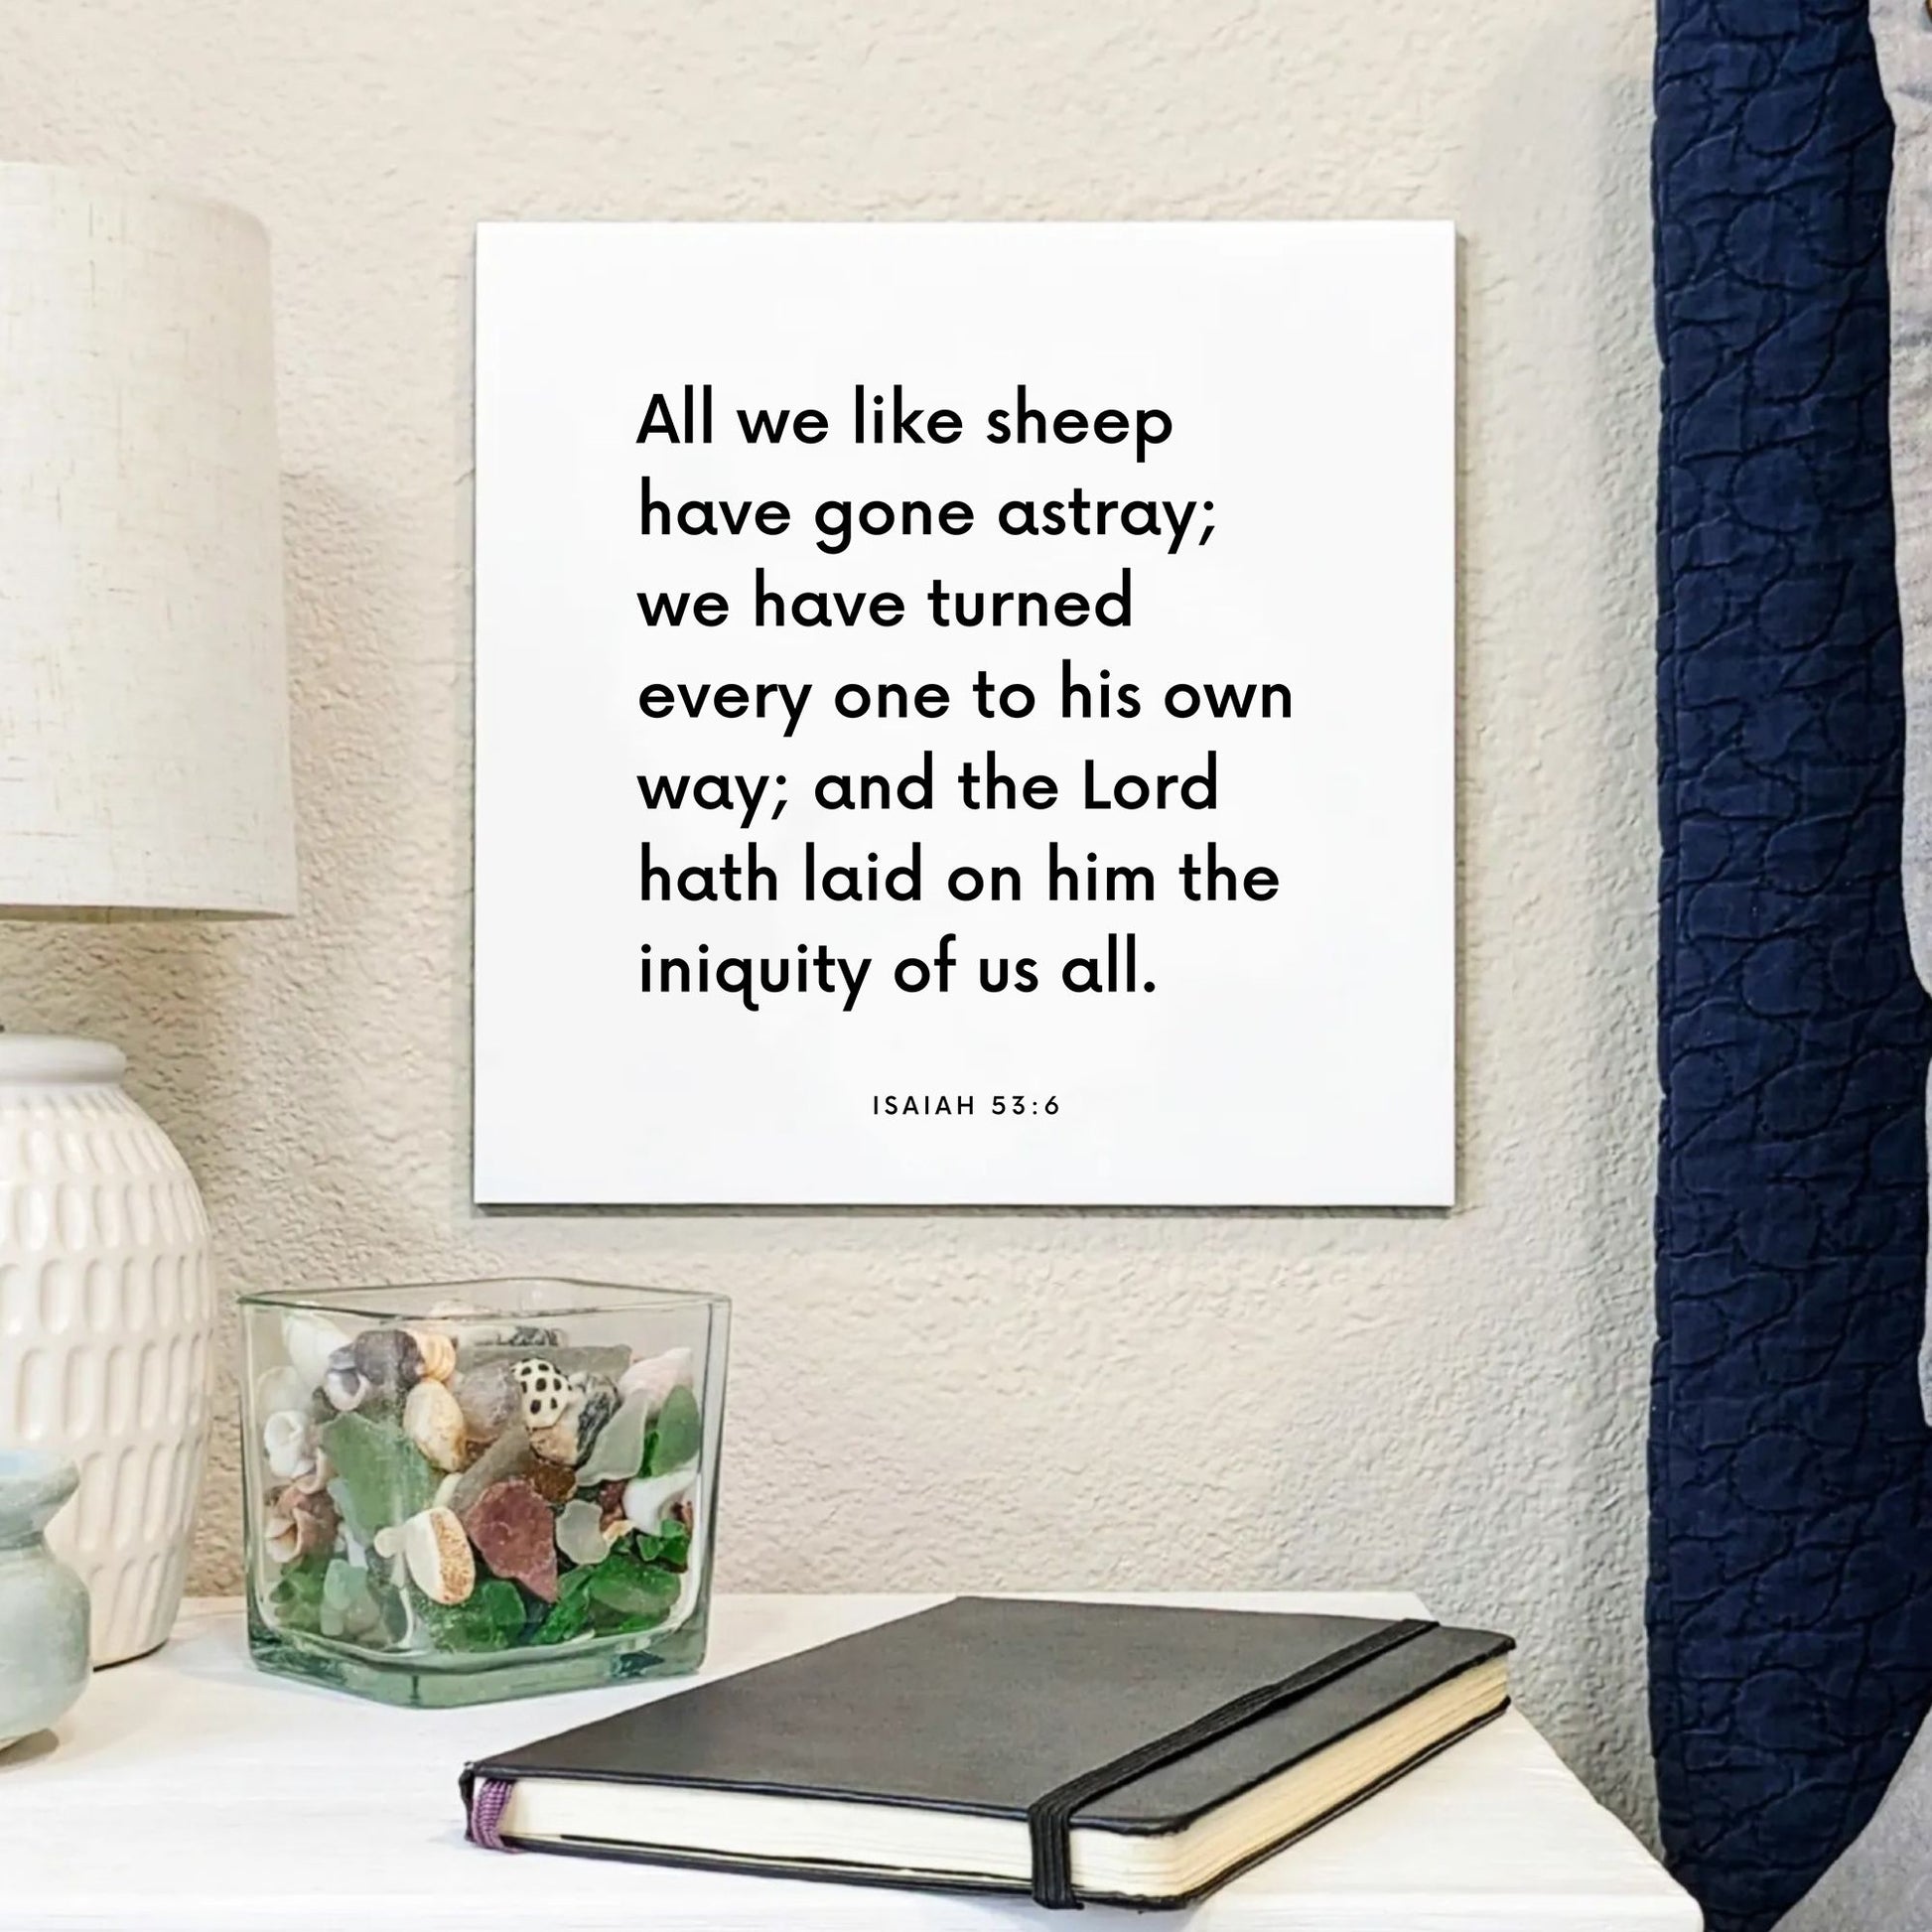 Bedside mouting of the scripture tile for Isaiah 53:6 - "All we like sheep have gone astray"